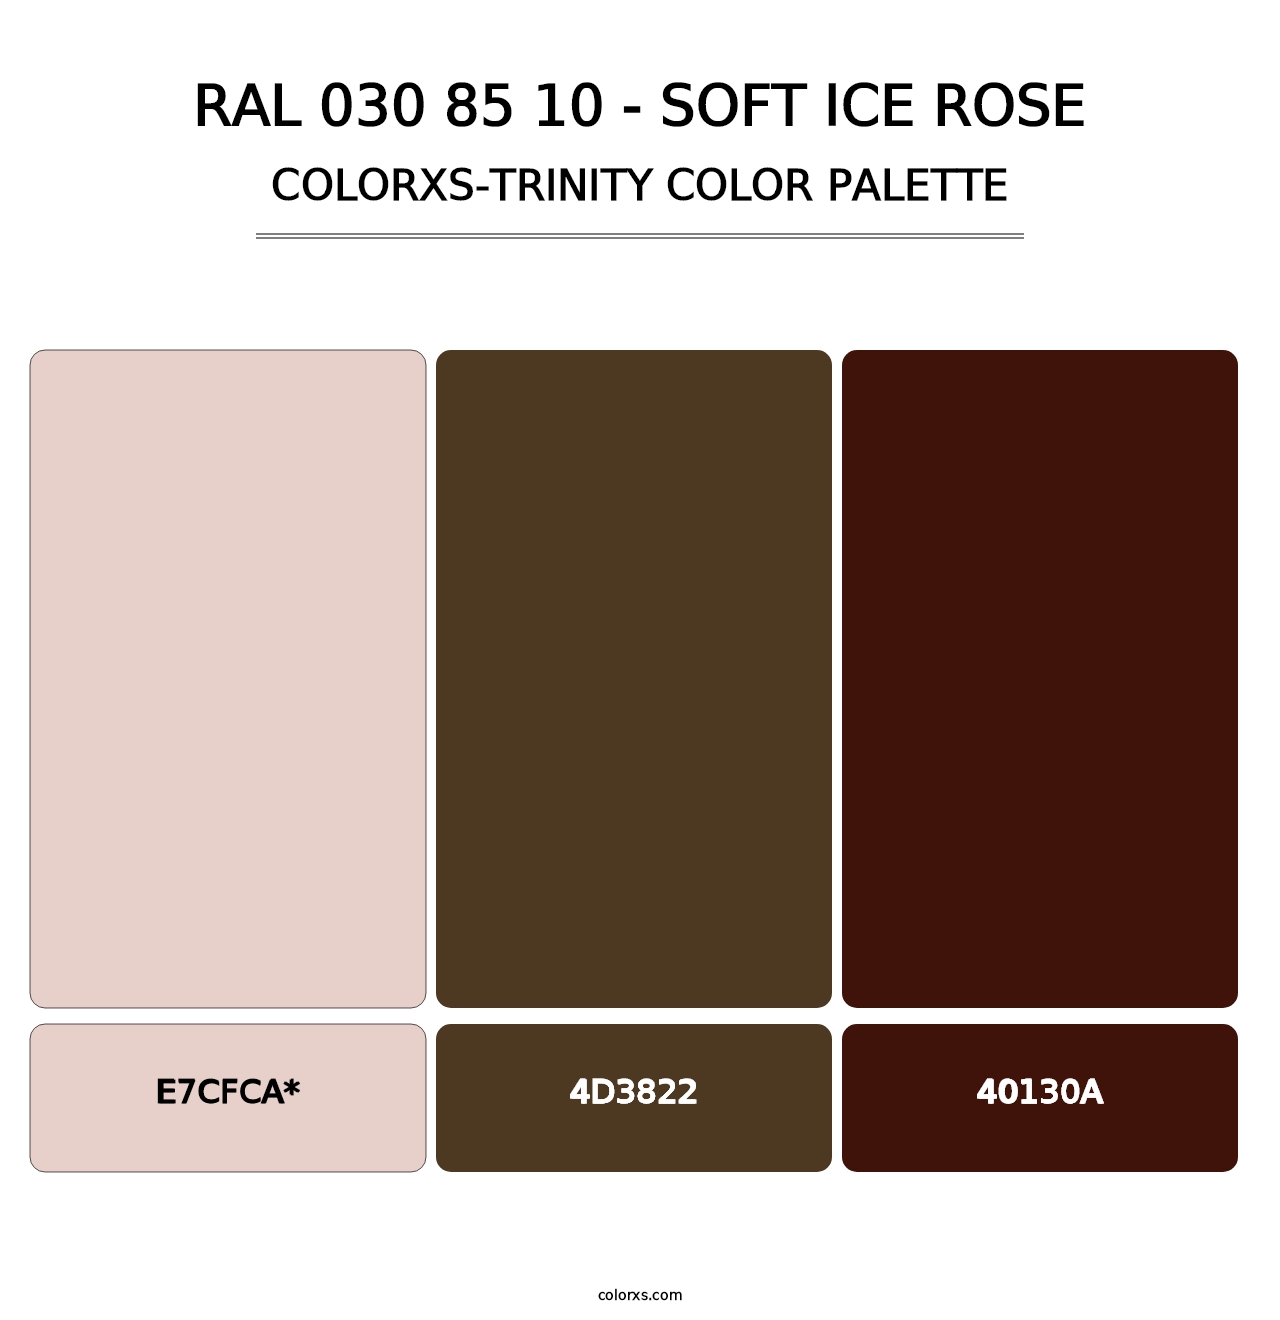 RAL 030 85 10 - Soft Ice Rose - Colorxs Trinity Palette